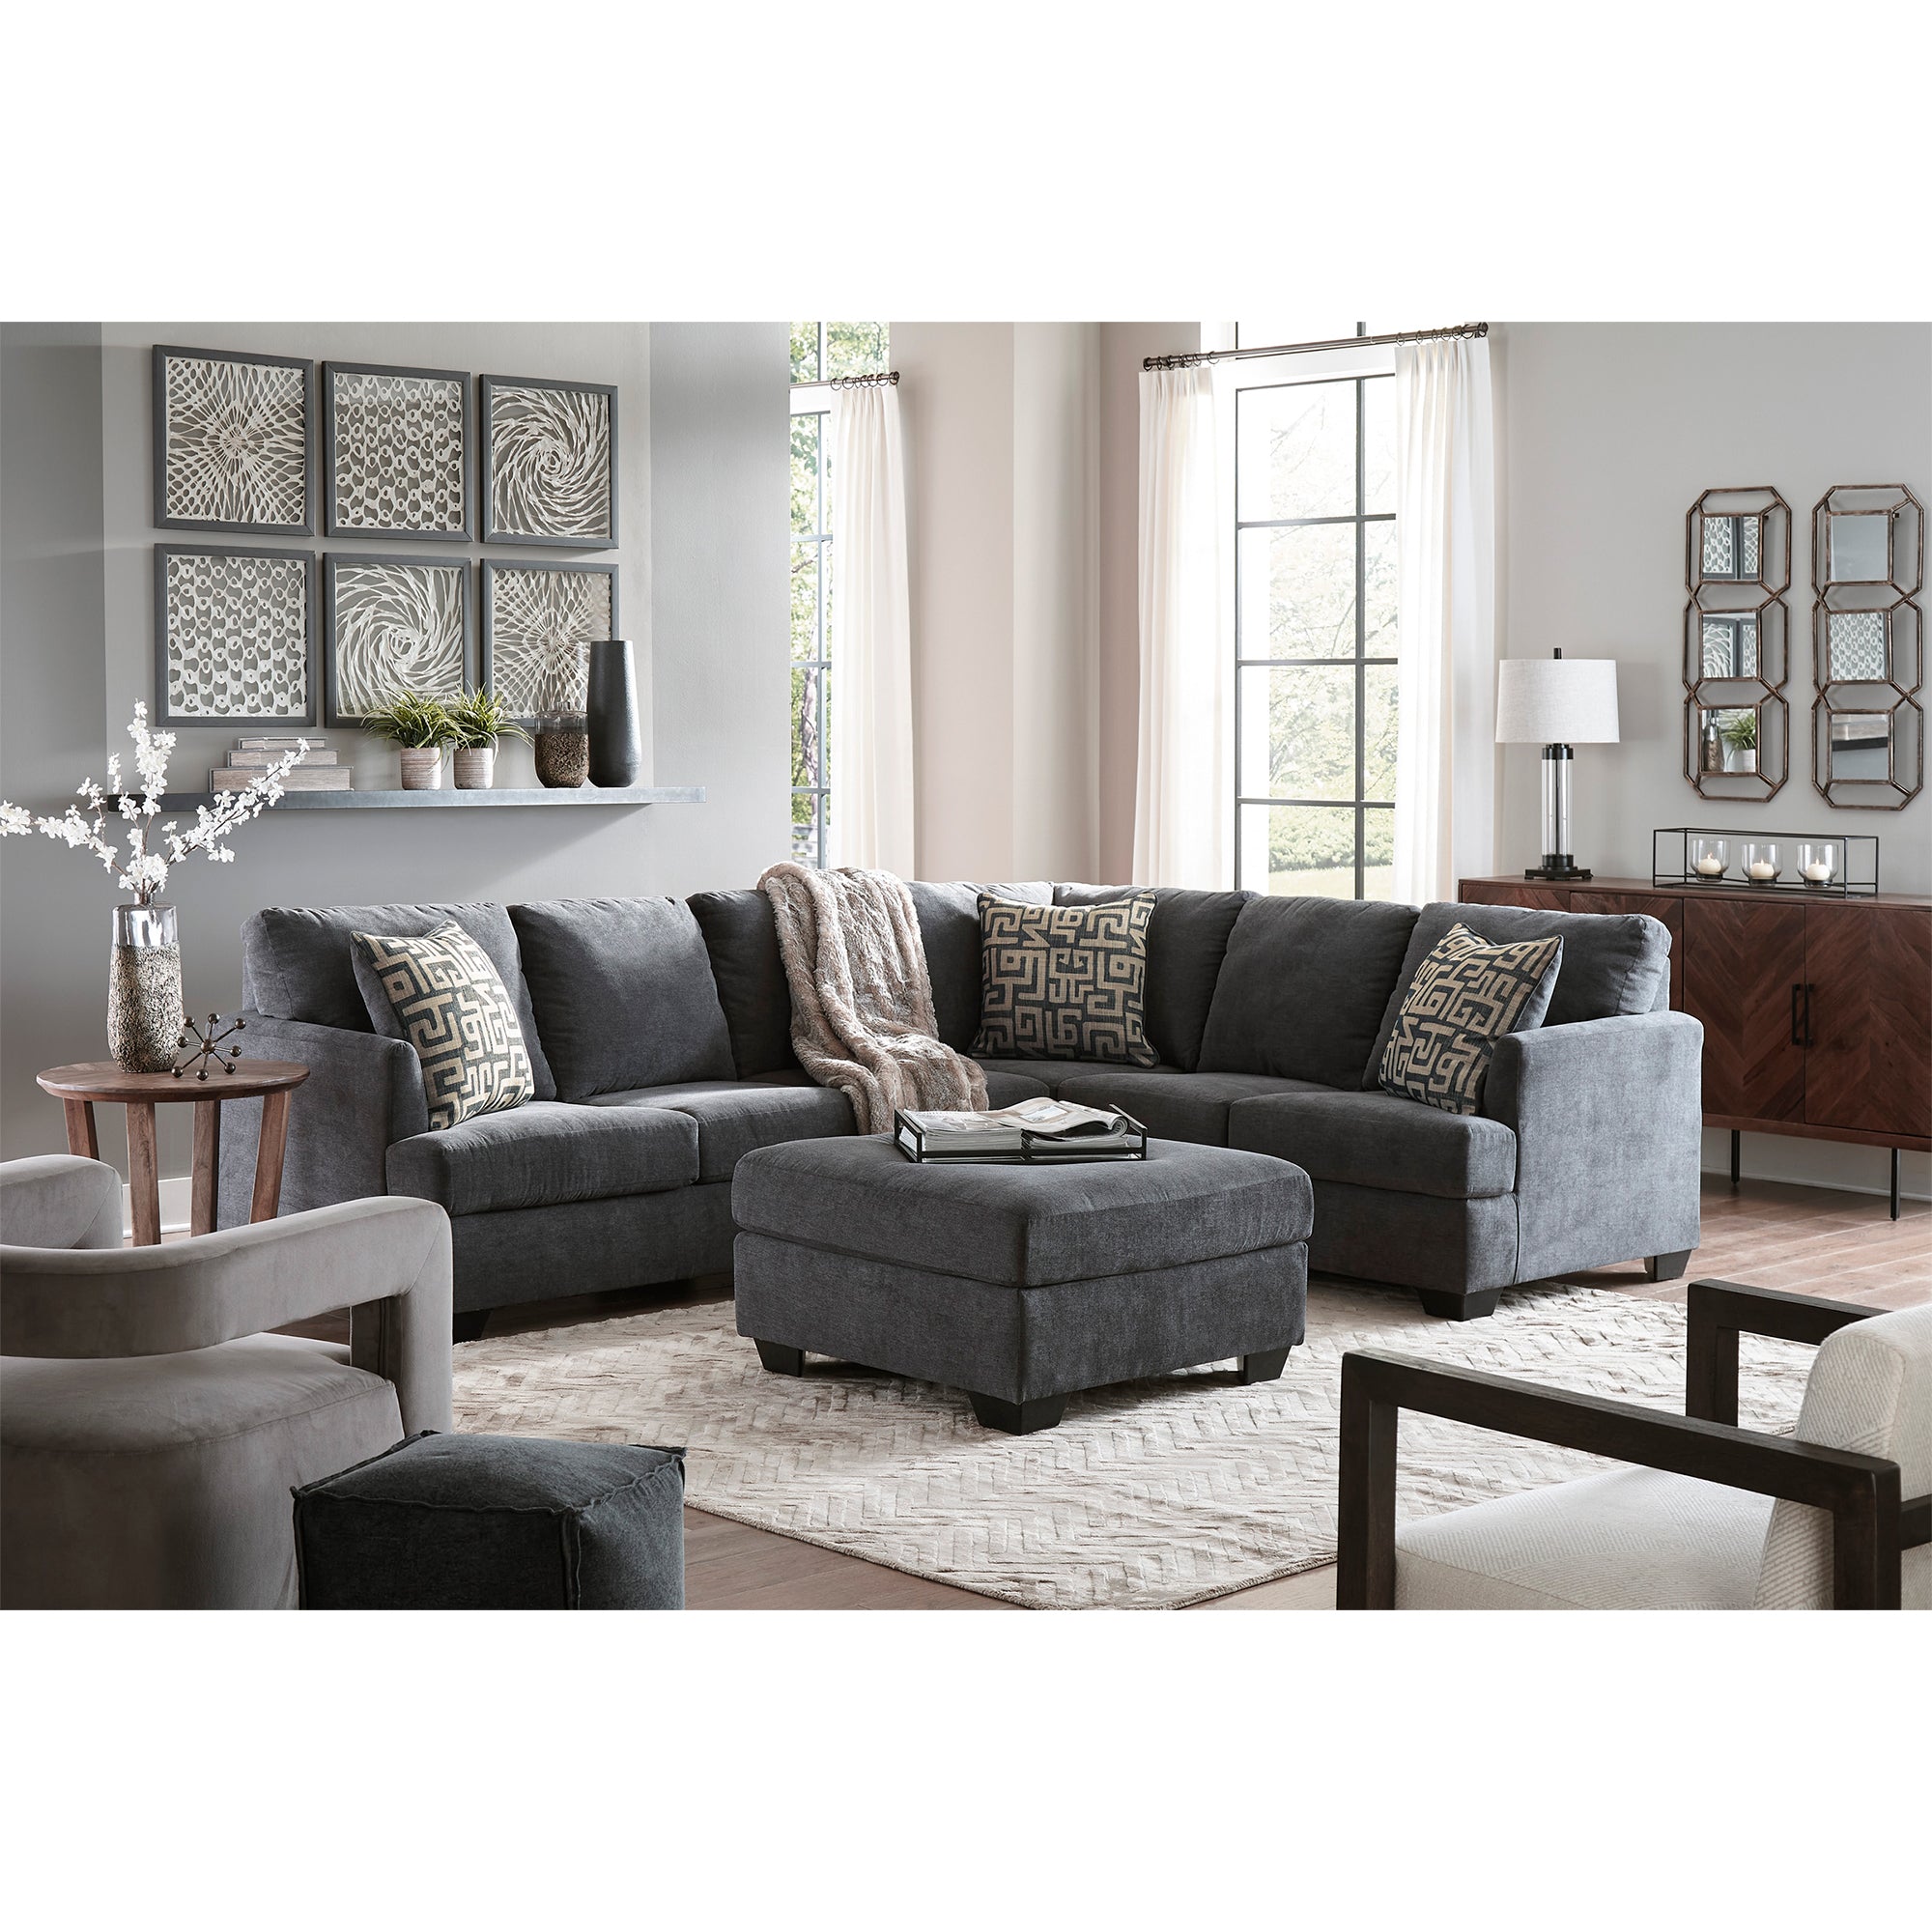 Ambrielle 2-Piece Sectional in Gunmetal Color